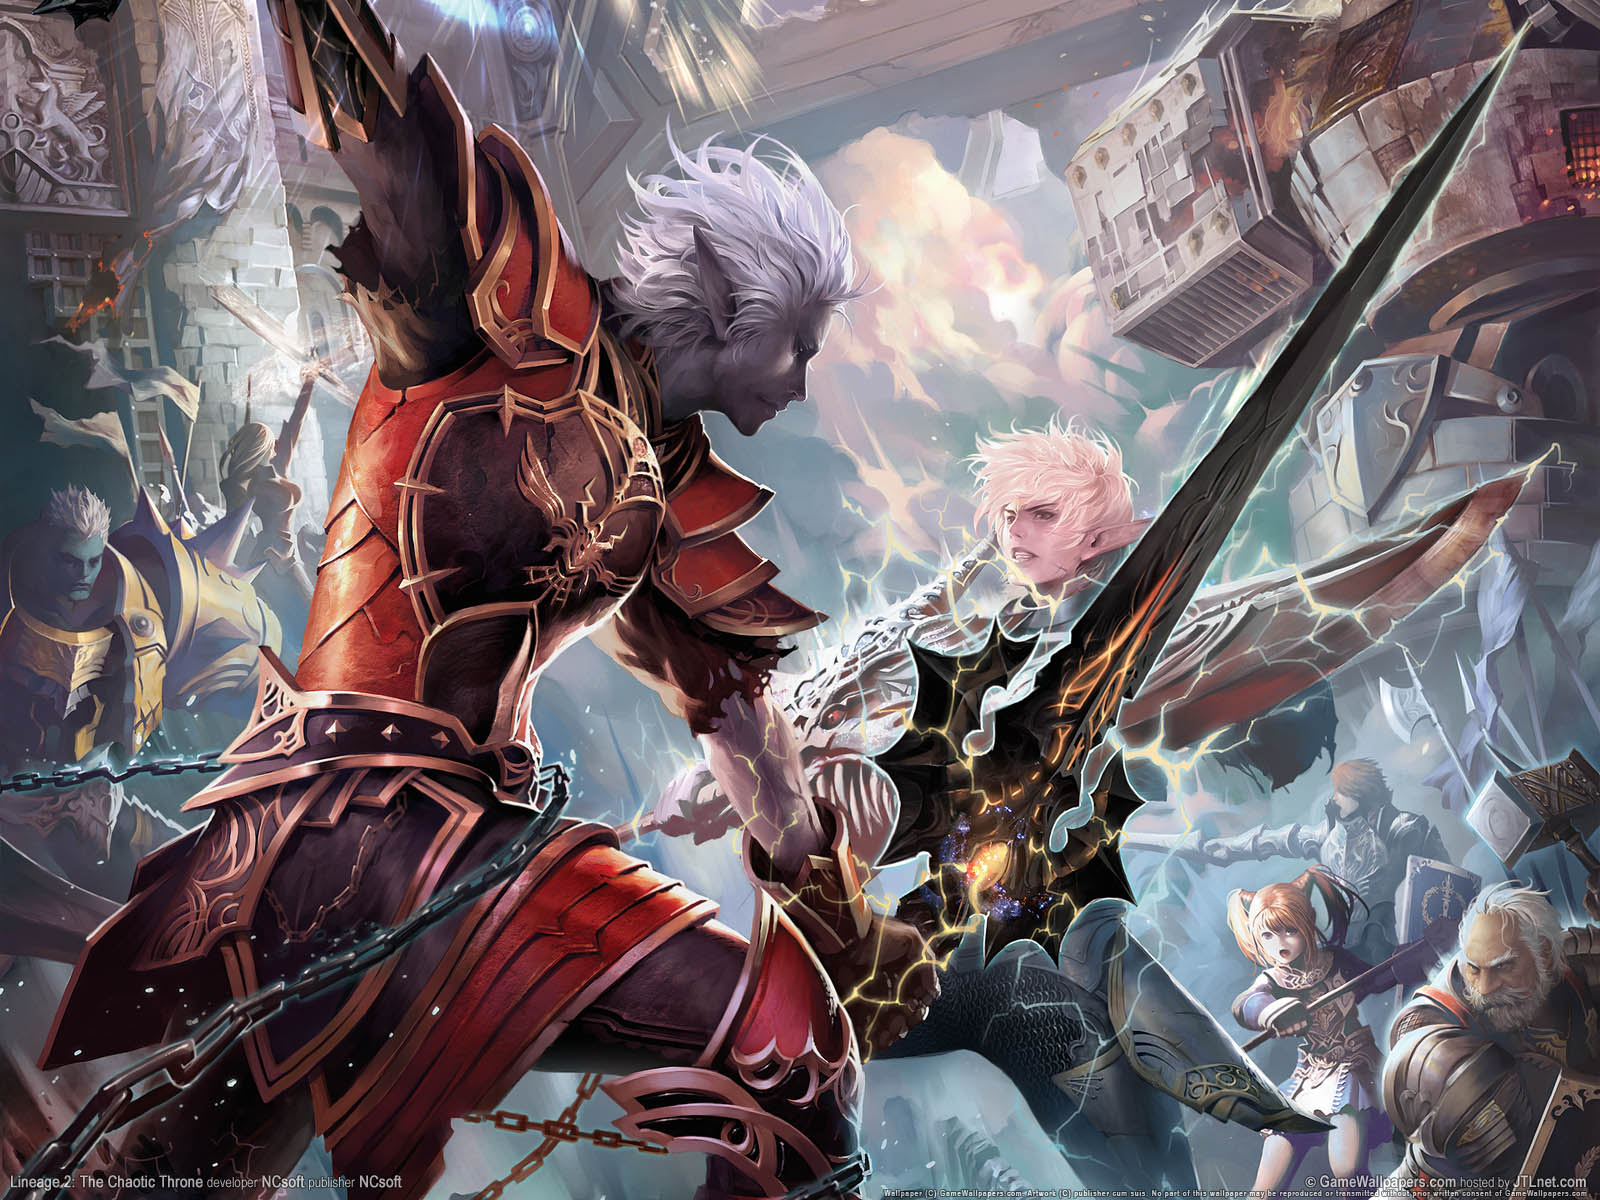 Lineage 2: The Chaotic Throne wallpaper 01 1600x1200